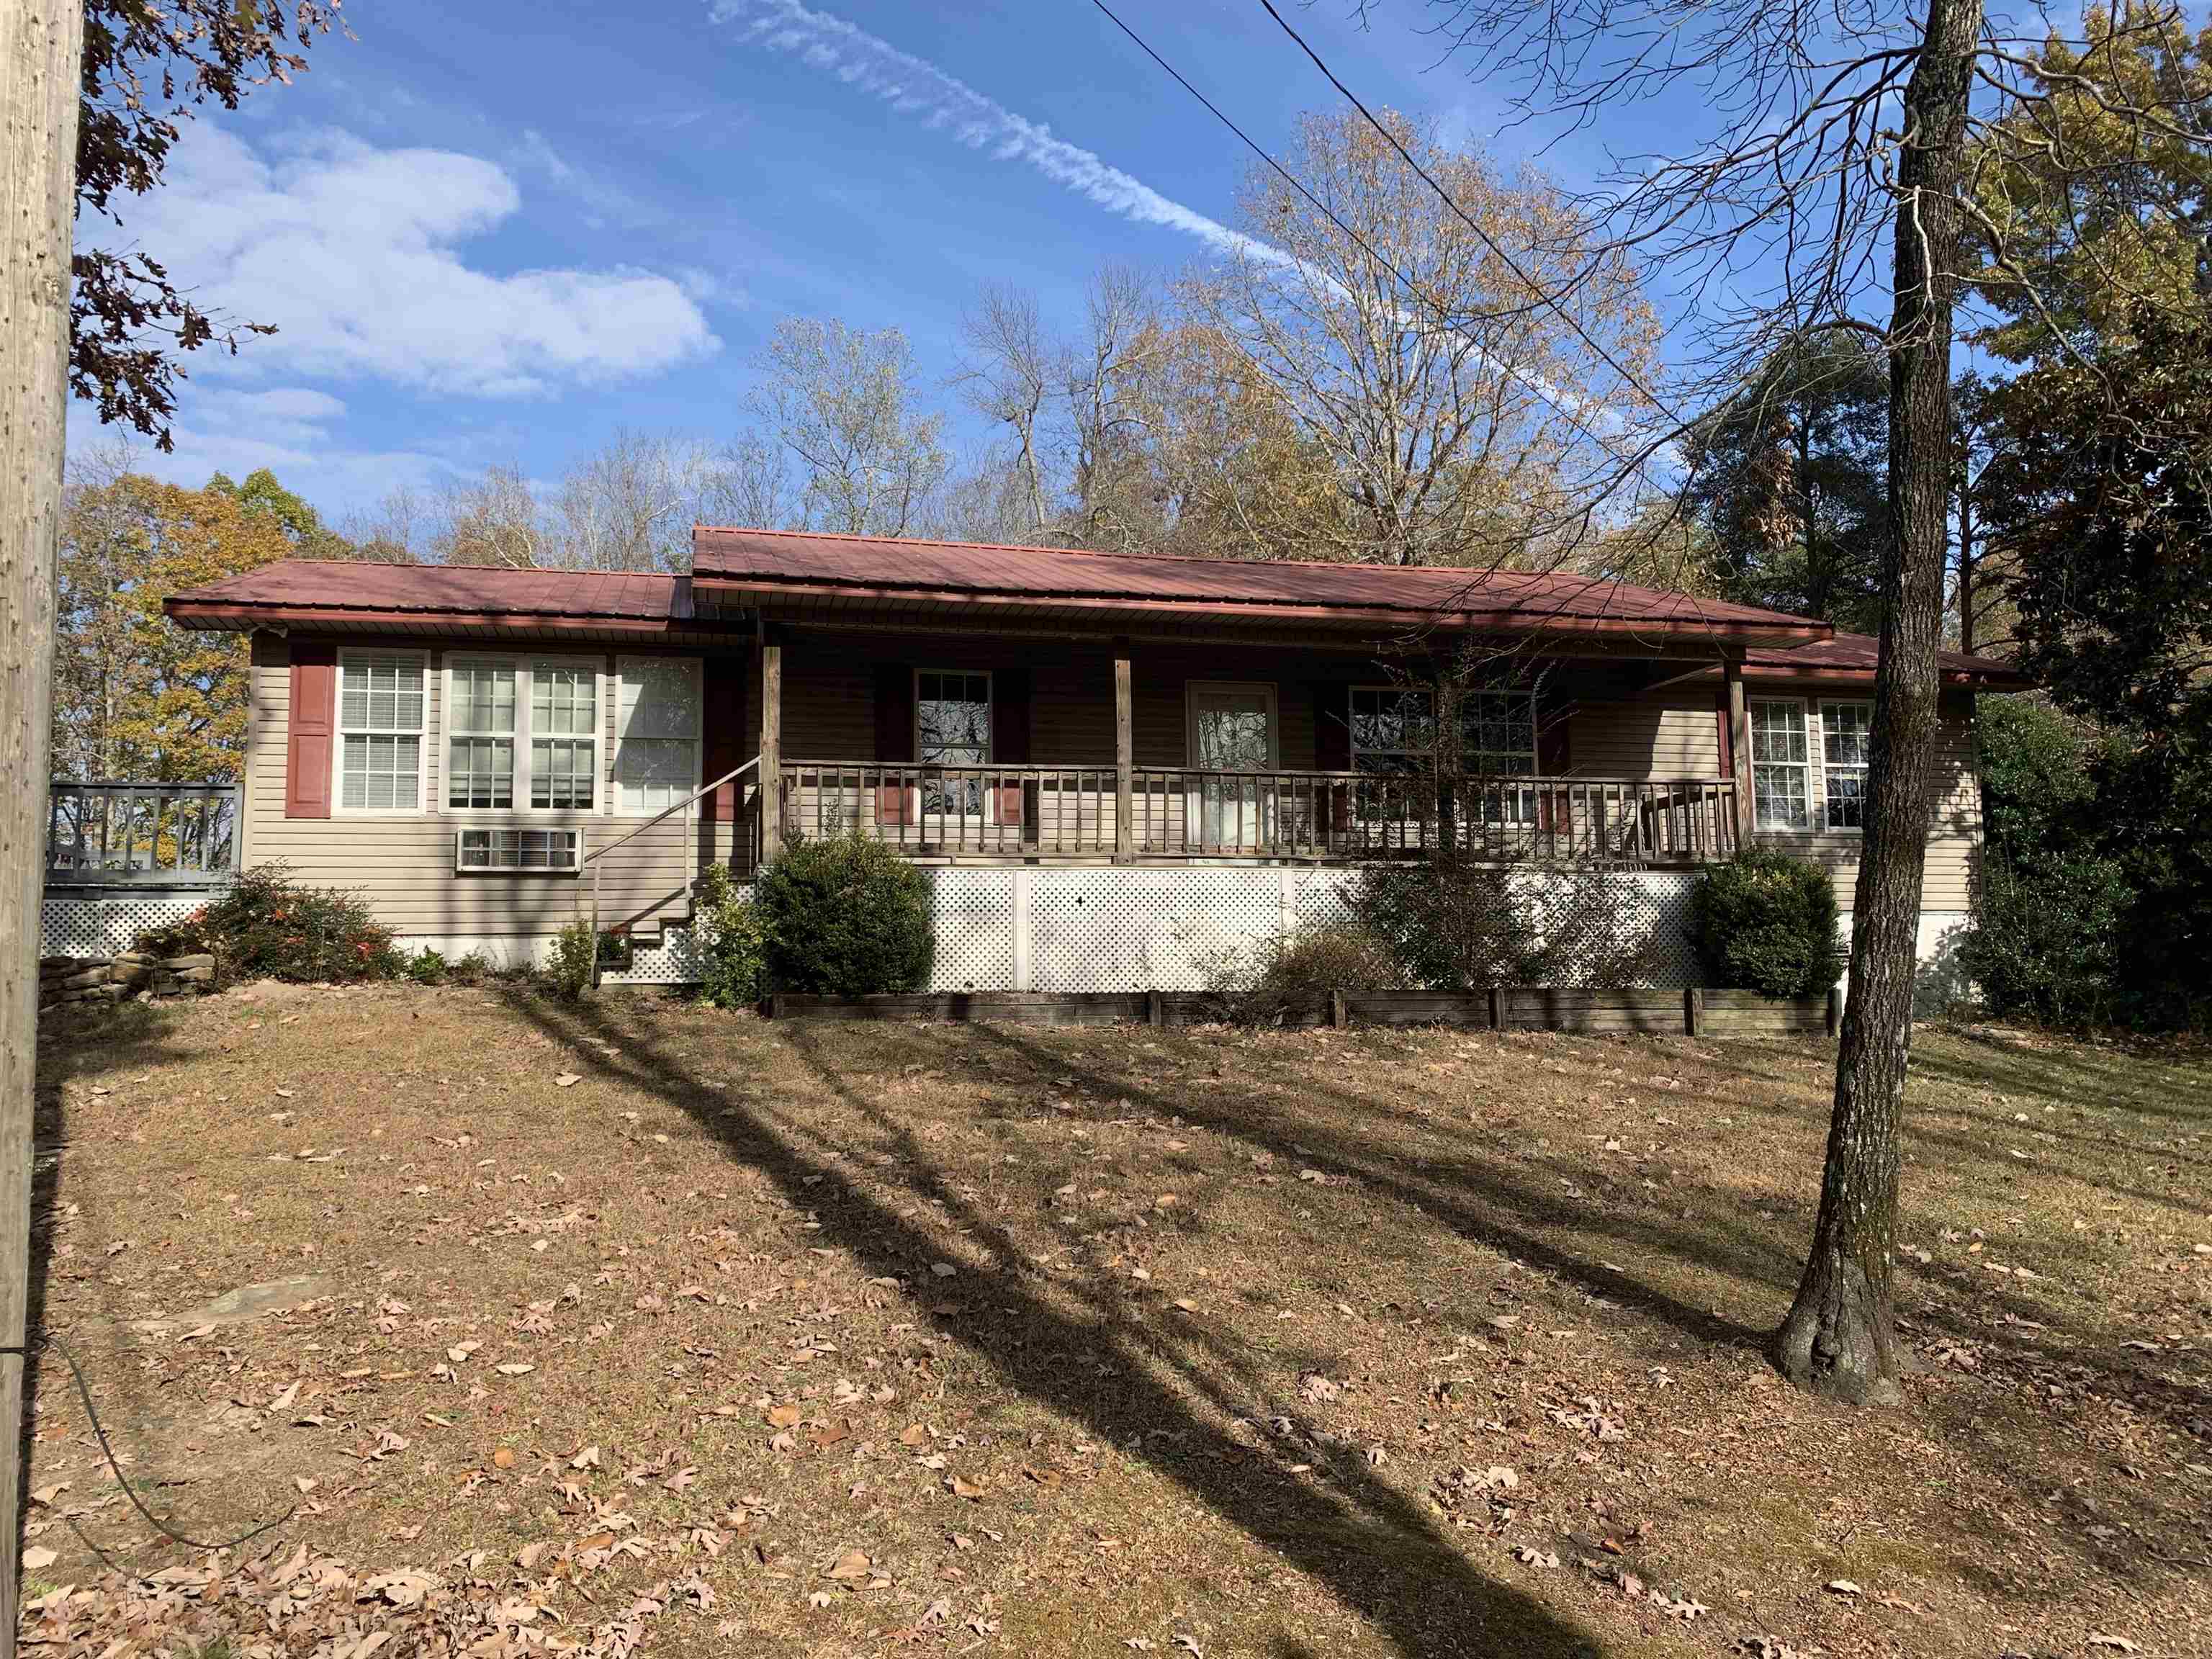 Rare finding in a neighborhood that very little is ever listed.  This home contains tons of character.  Spacious and clean 2 bed, 2 bath home with huge finished detached garage.  This 10+/- acre property is a must see.  Call us today for your showing.